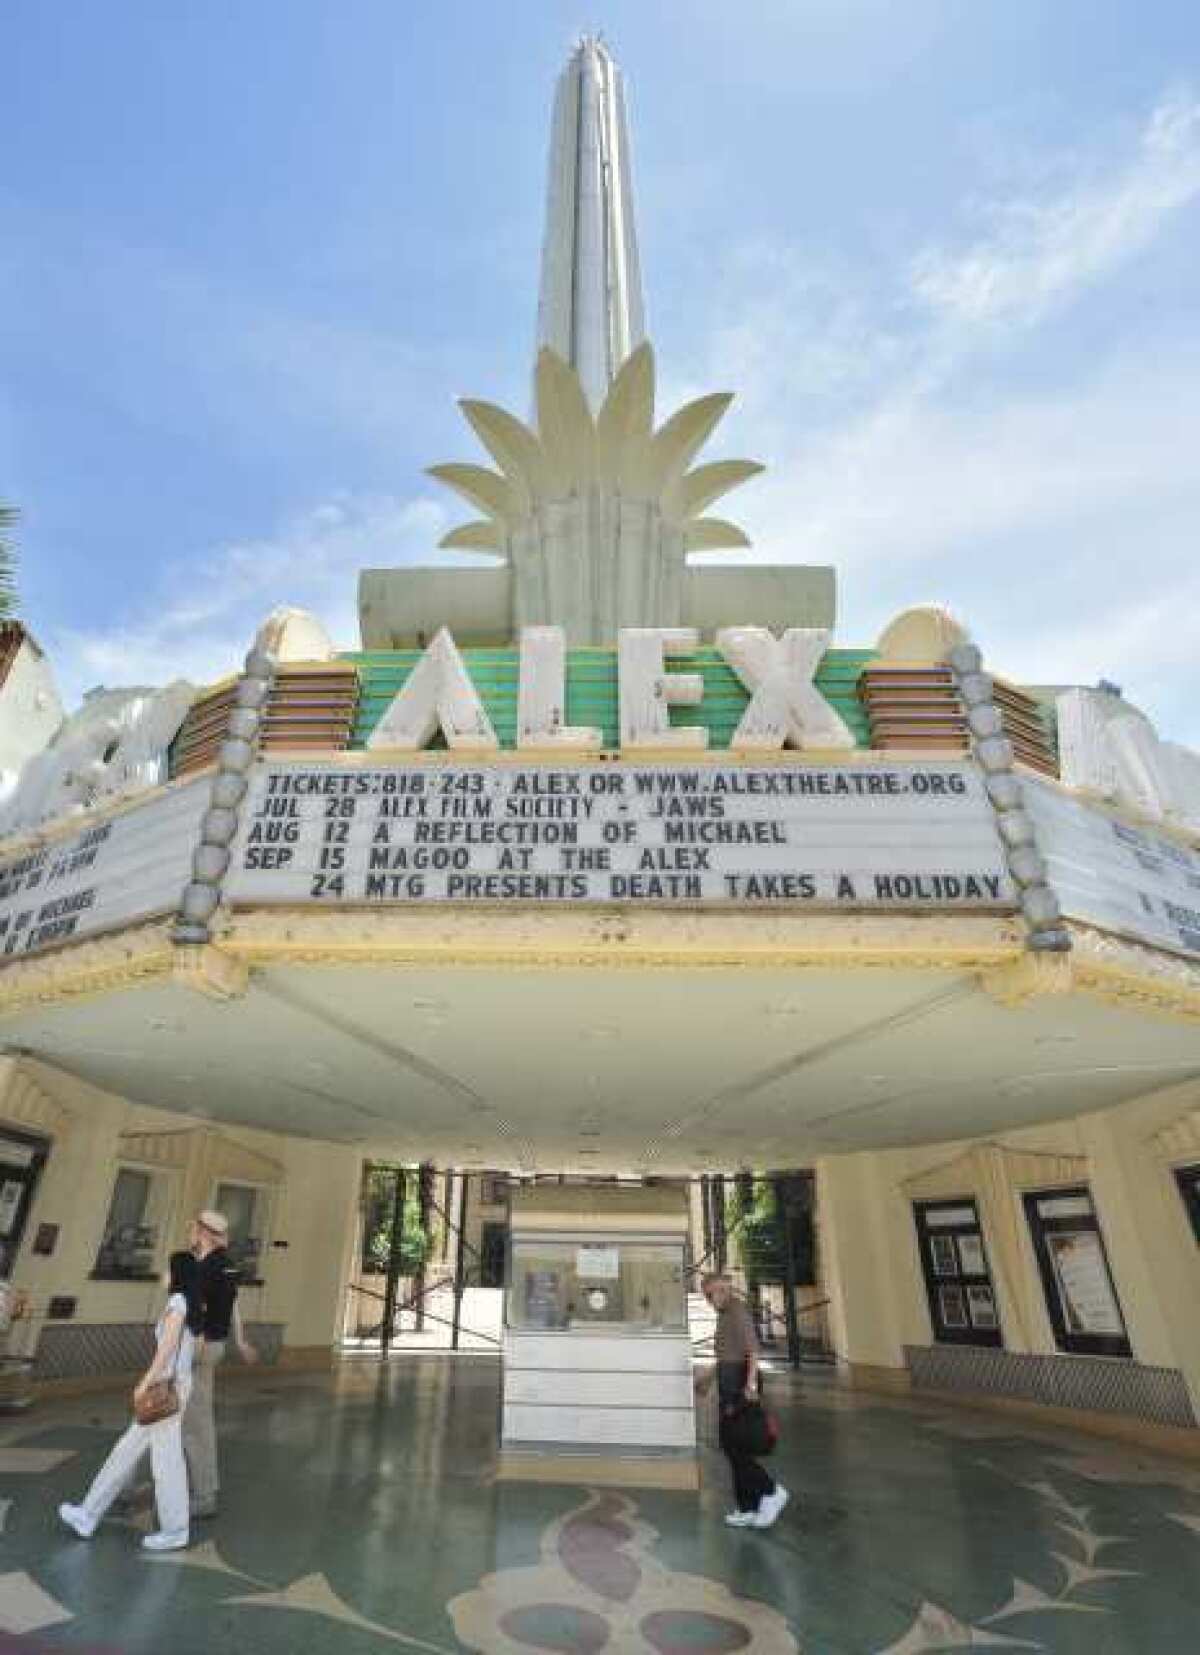 Glendale Arts board members and residents plan to form a task force to deal with the loss of state funding for the Alex Theatre.